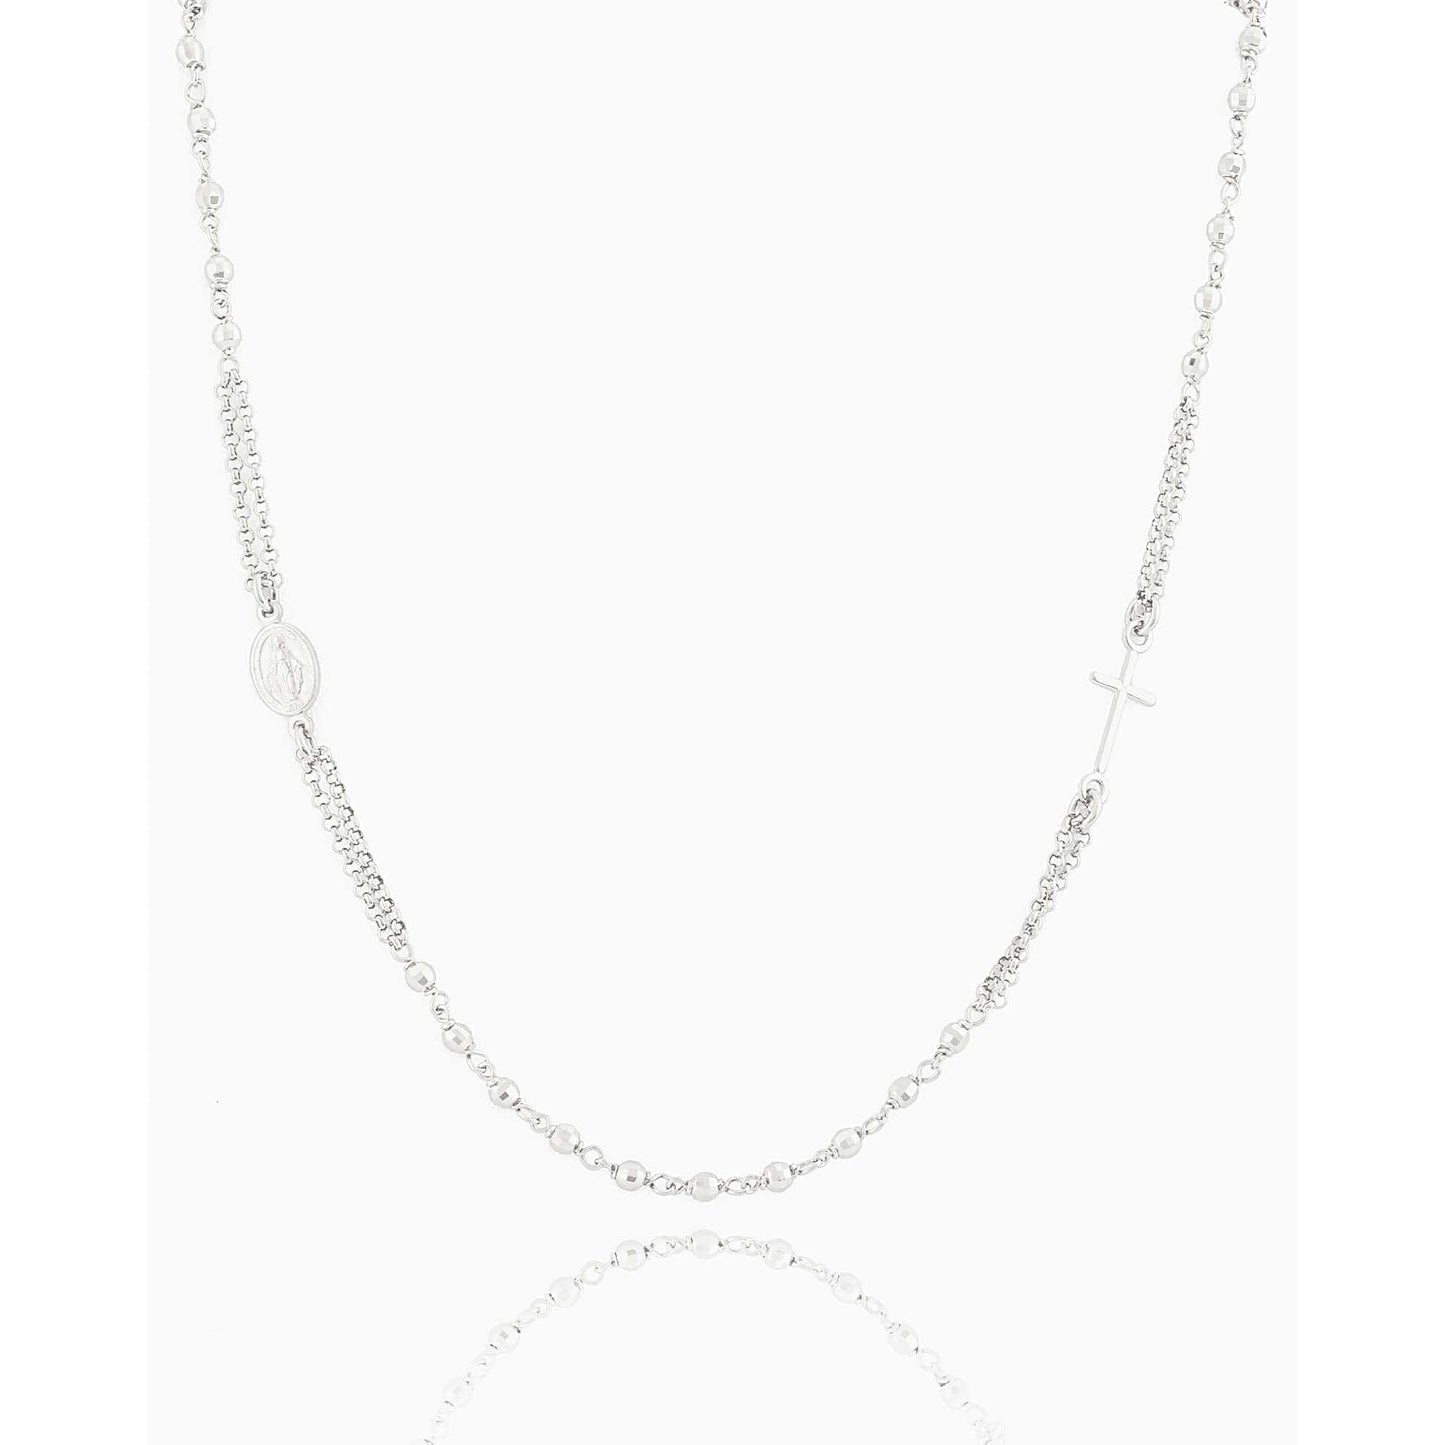 MONDO CATTOLICO Necklaces Rhodium / Cm 46 (18.1 in) STERLING SILVER PLATED 3 MM BEADS NECKLACE